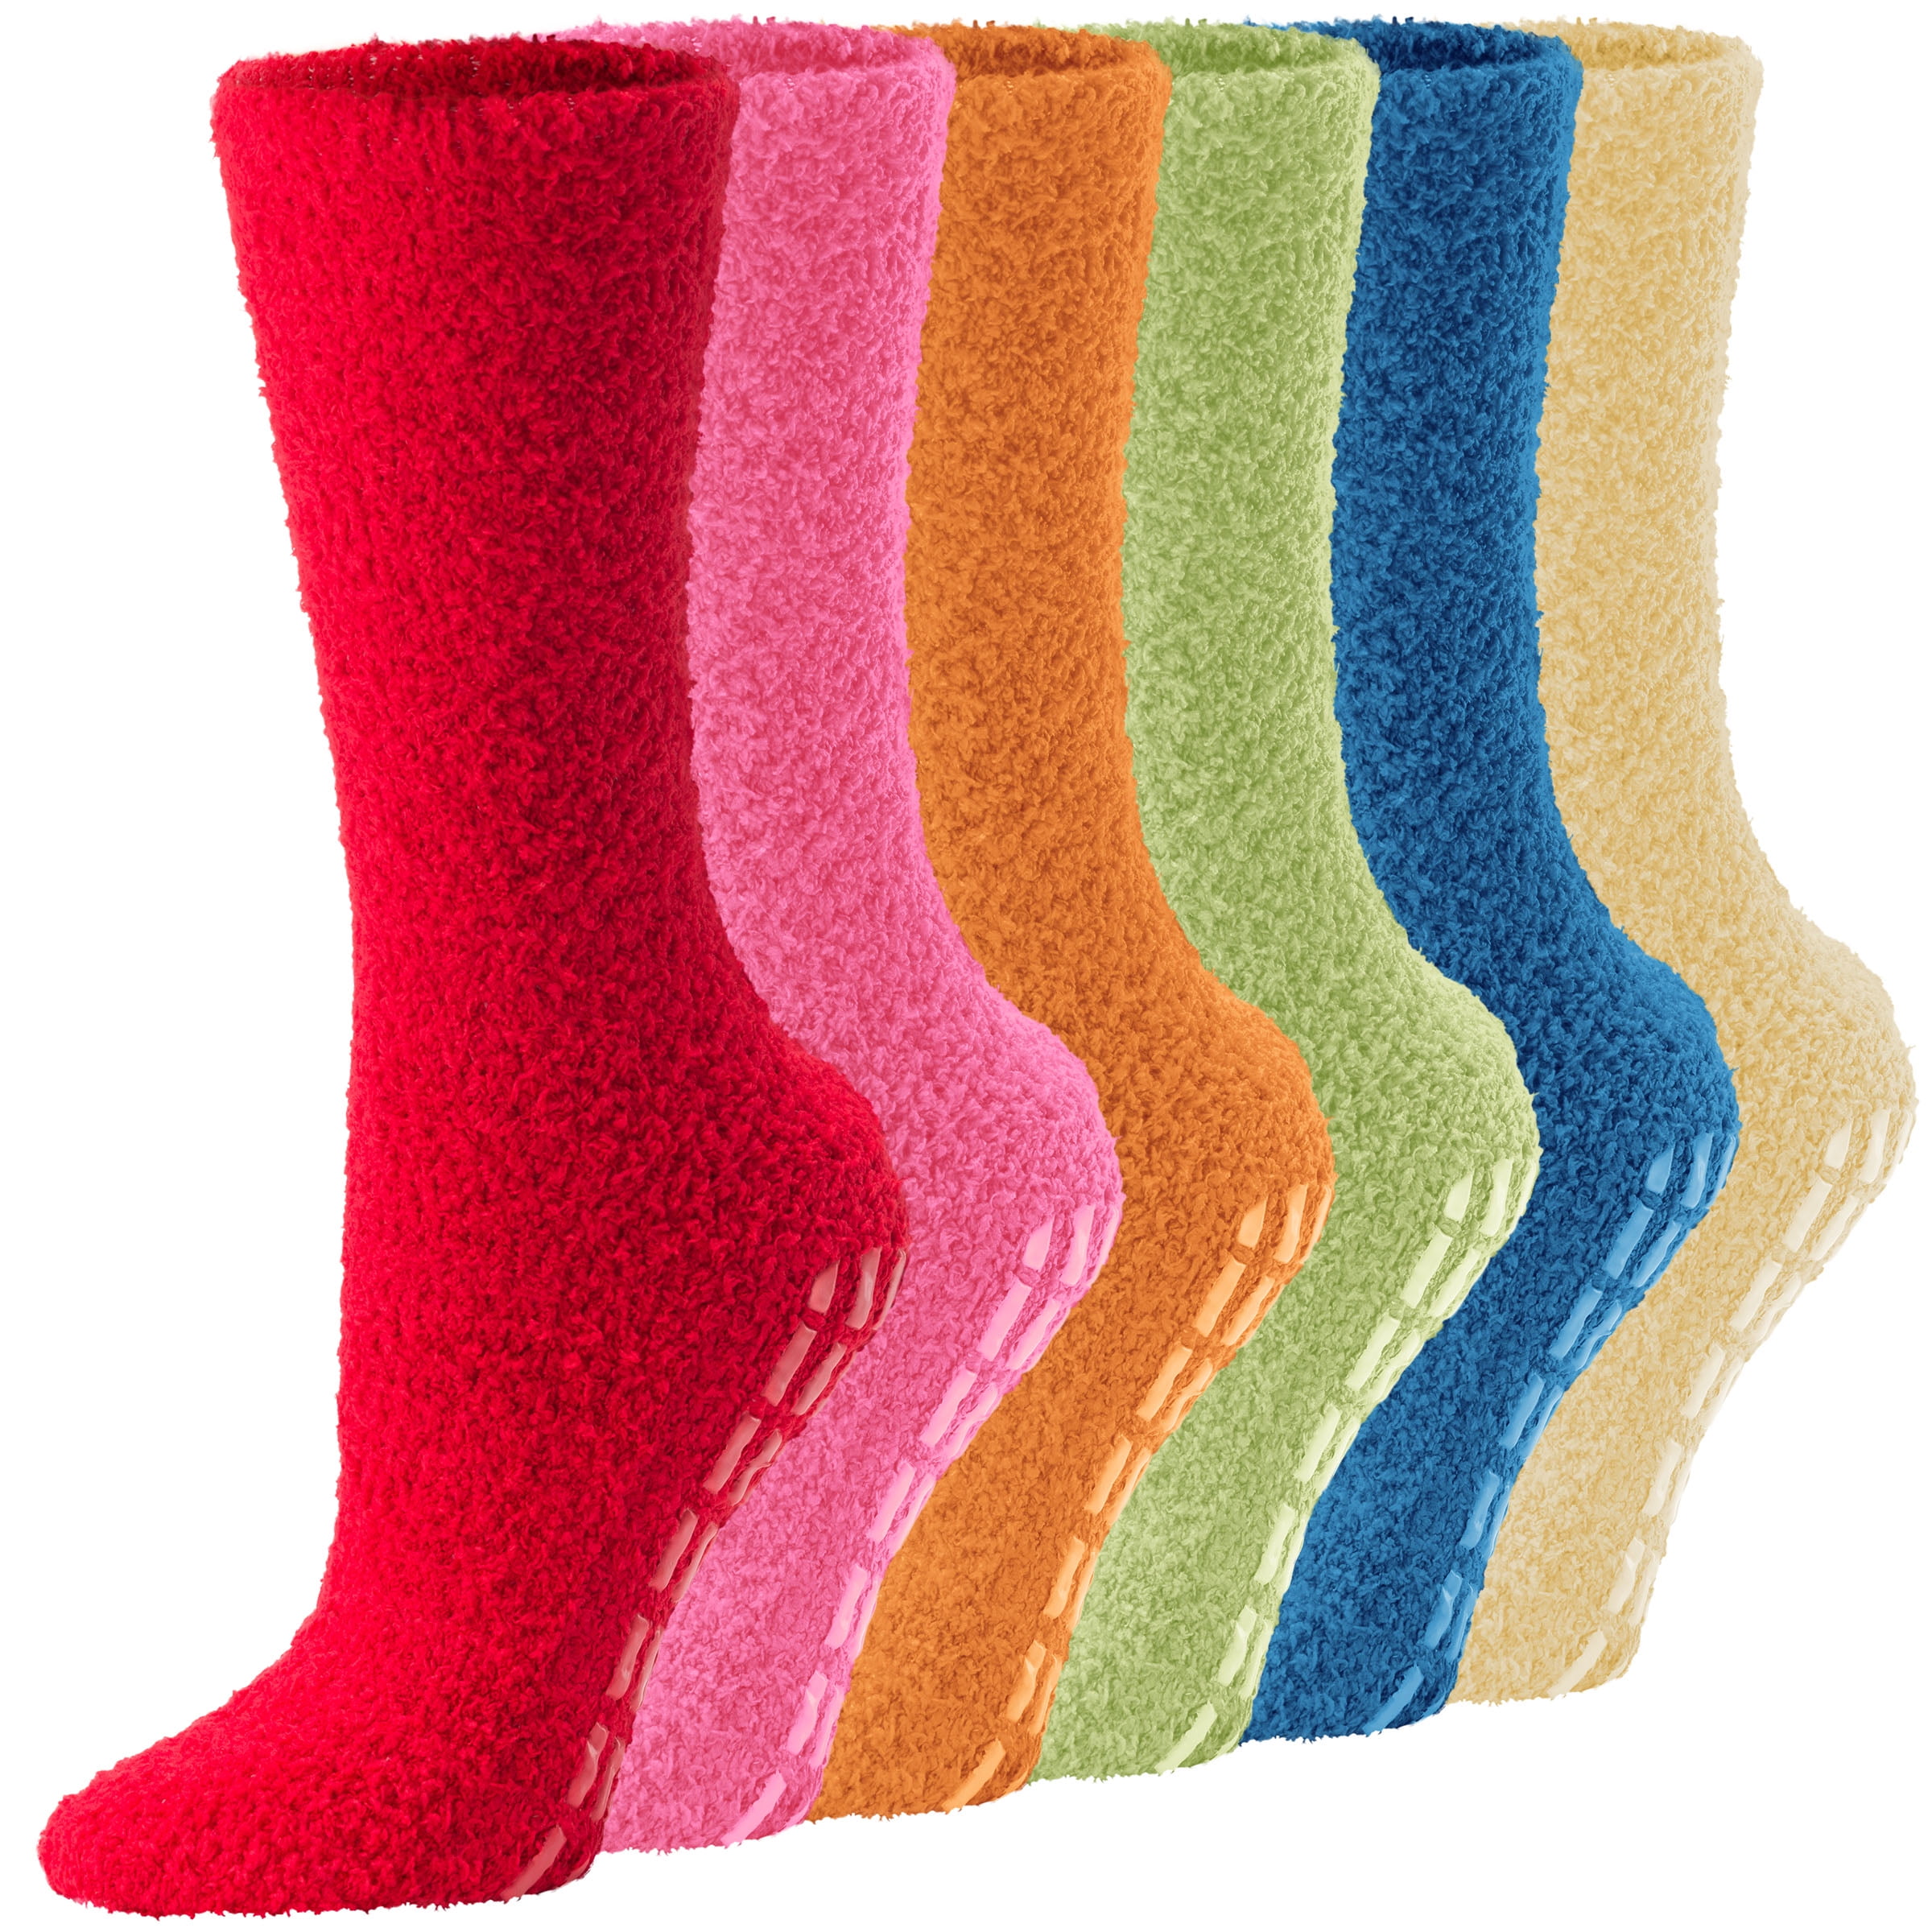 Fuzzy Socks With Grips | lupon.gov.ph